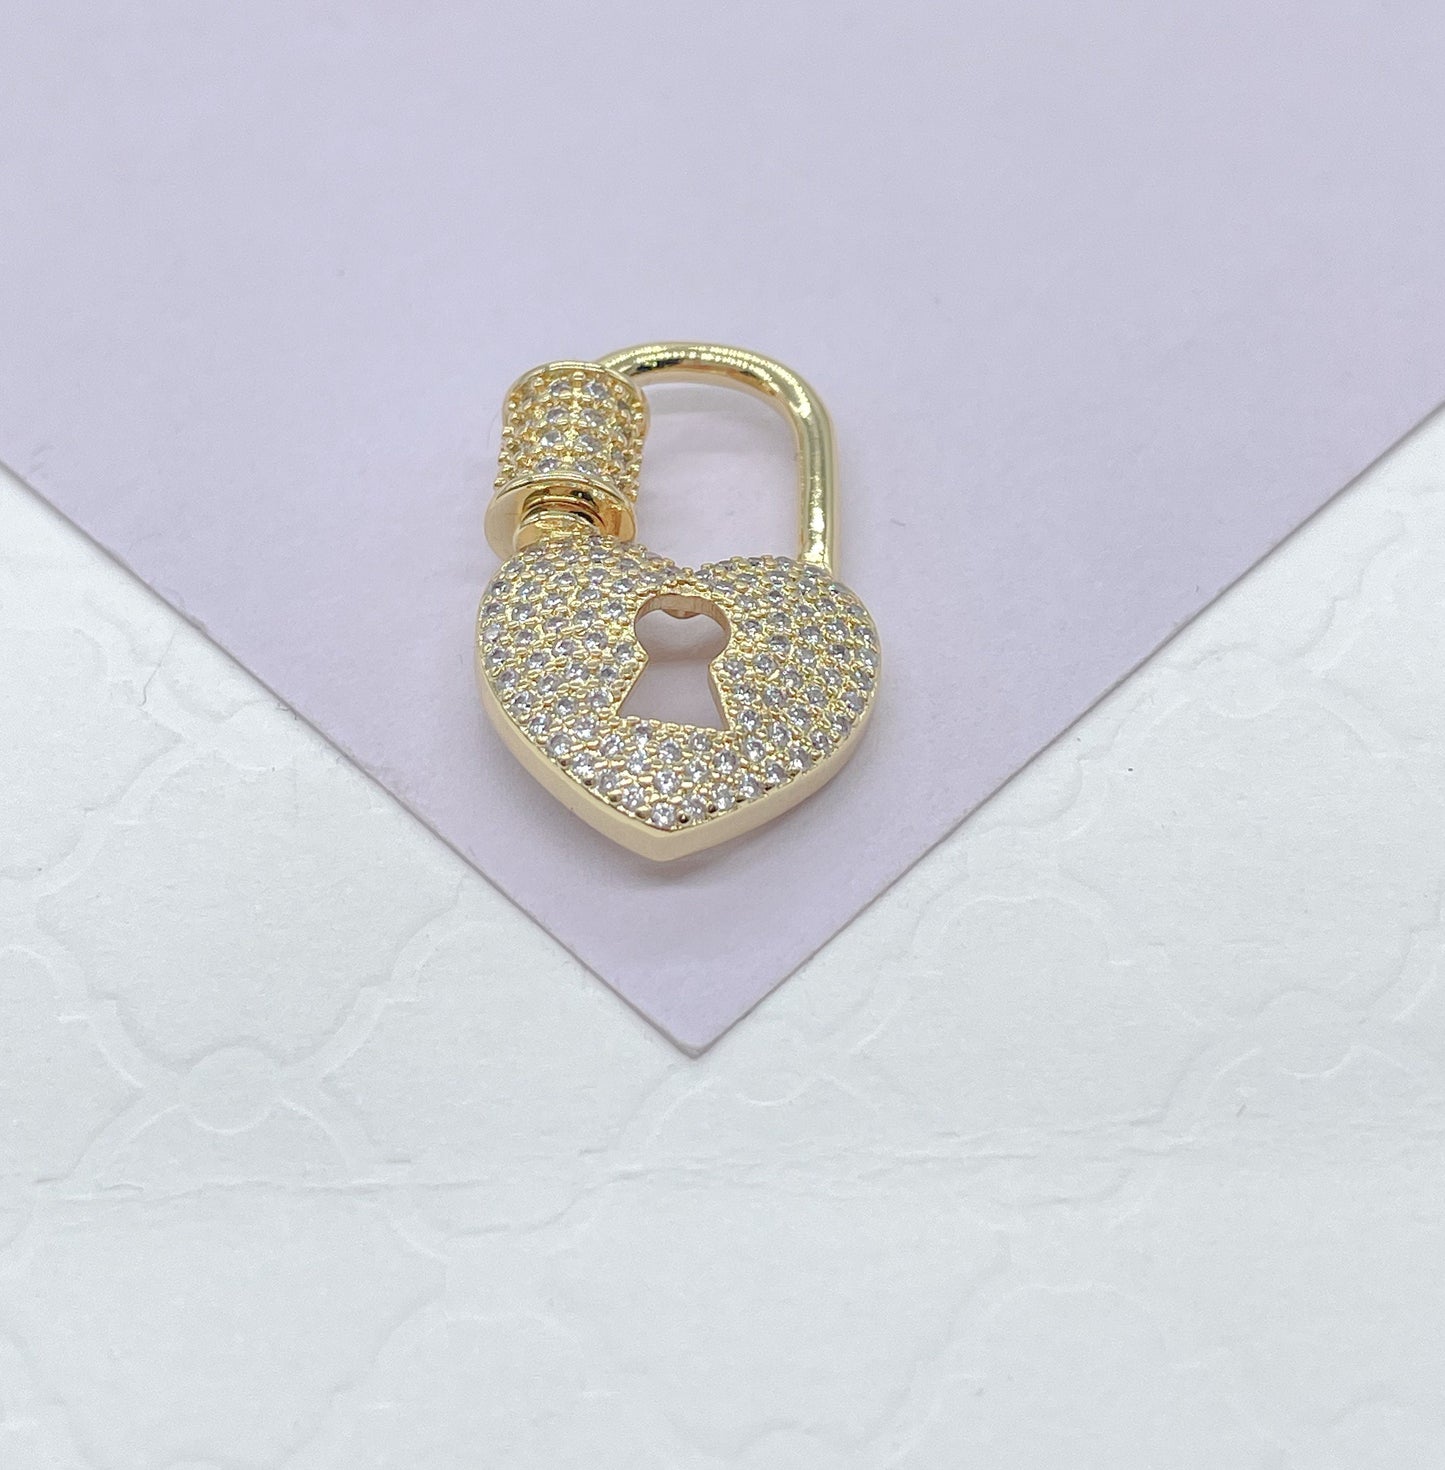 Unique 18k Gold Filled Heart Shape Carabiner Lock Clasp Featuring Plain and Pave Zirconia Style